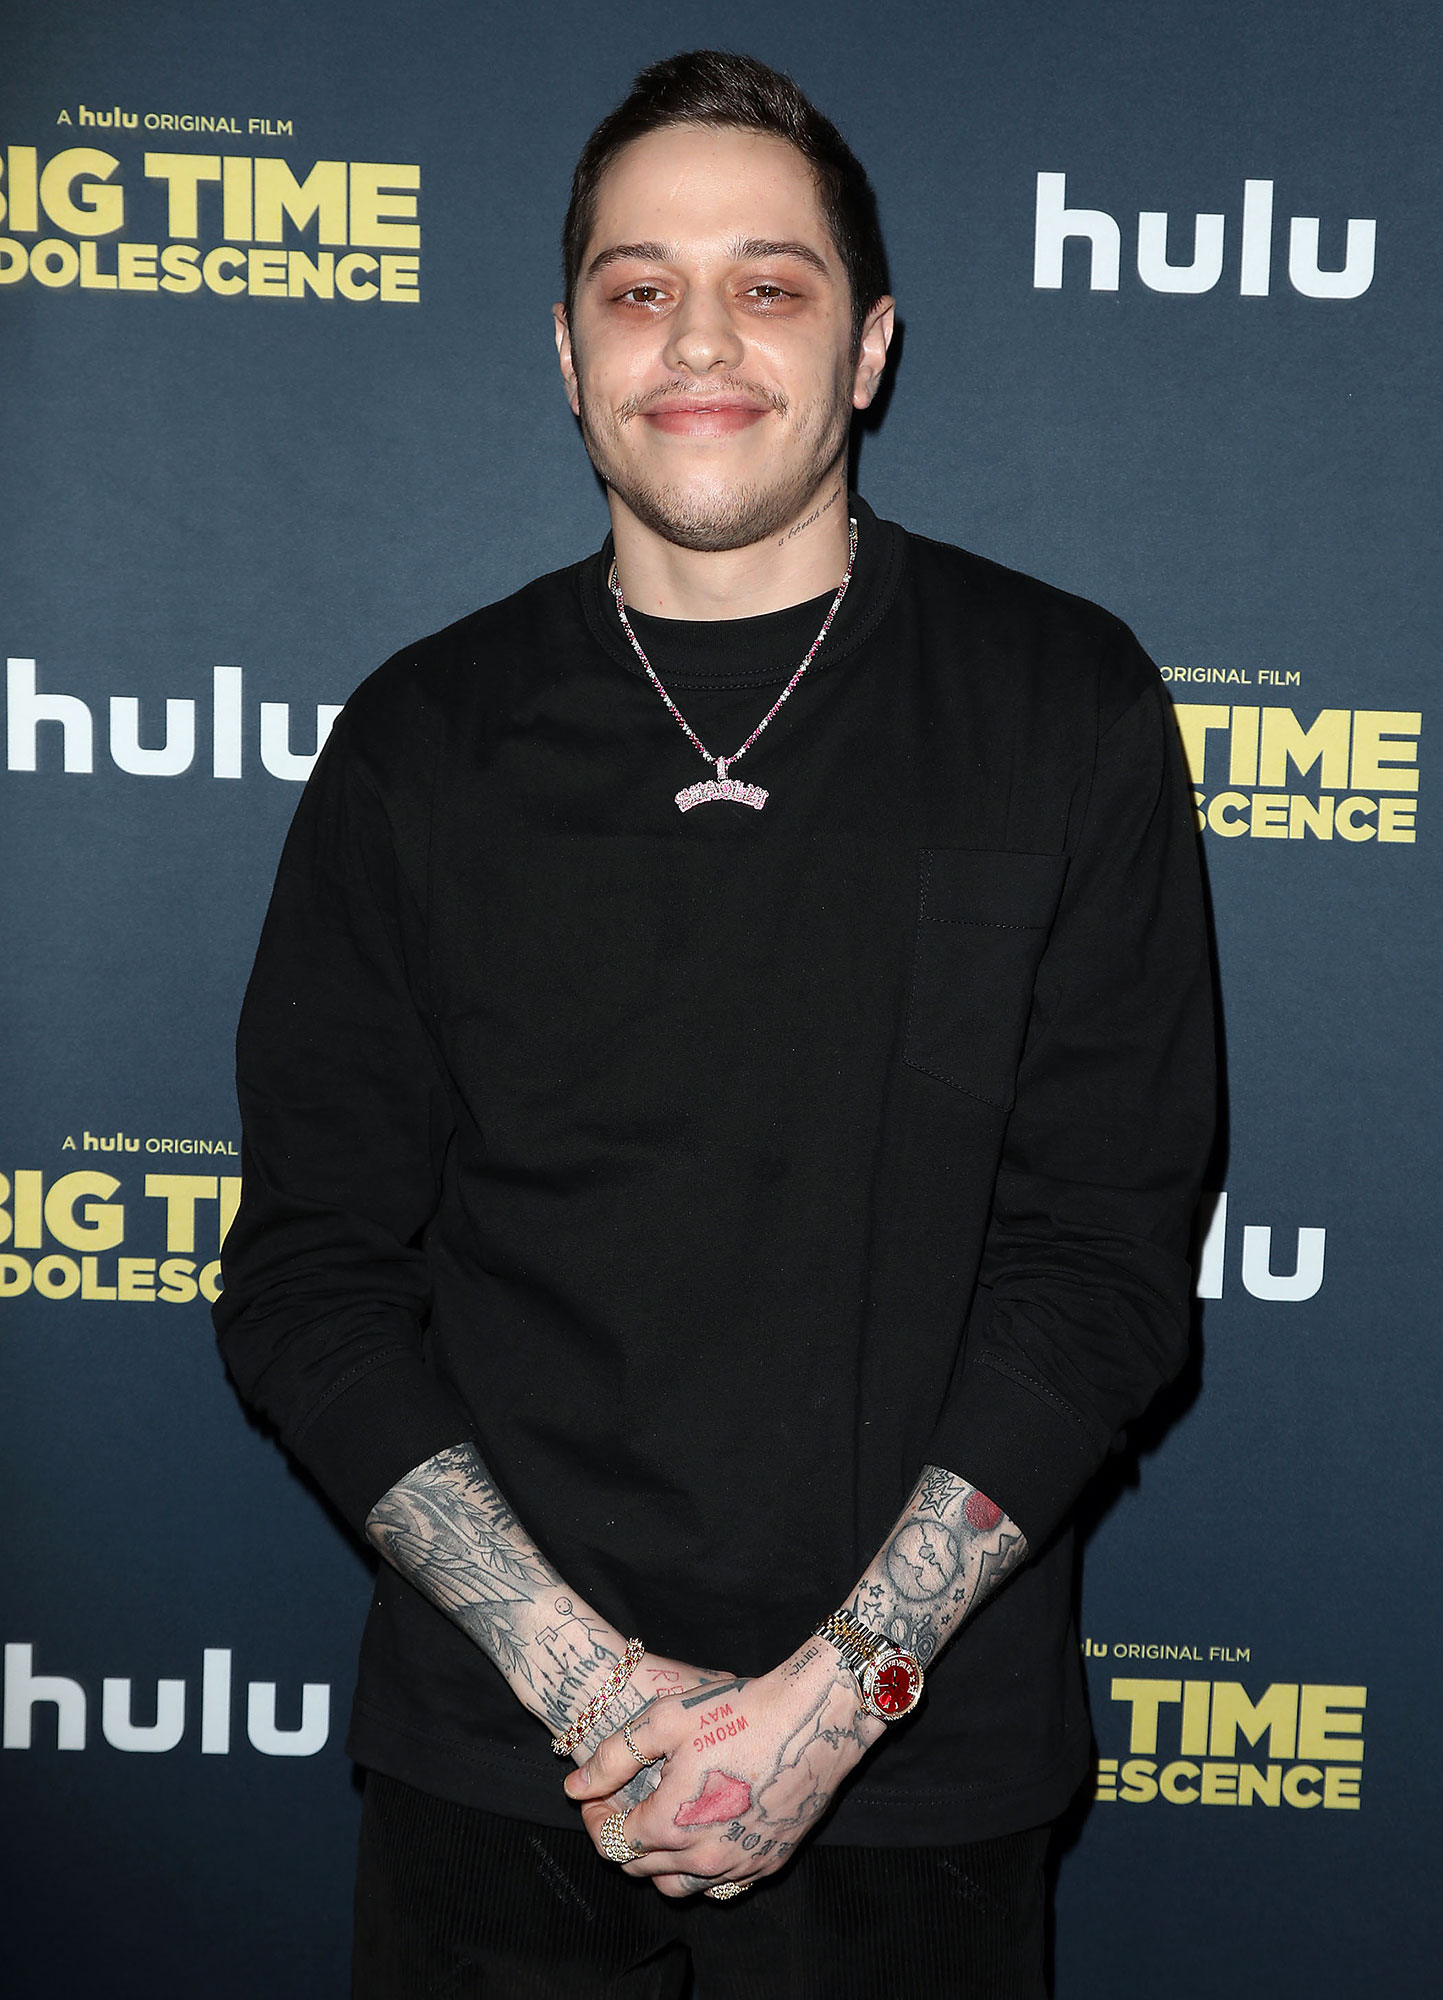 What's Next for Pete Davidson After His Official Saturday Night Live Exit